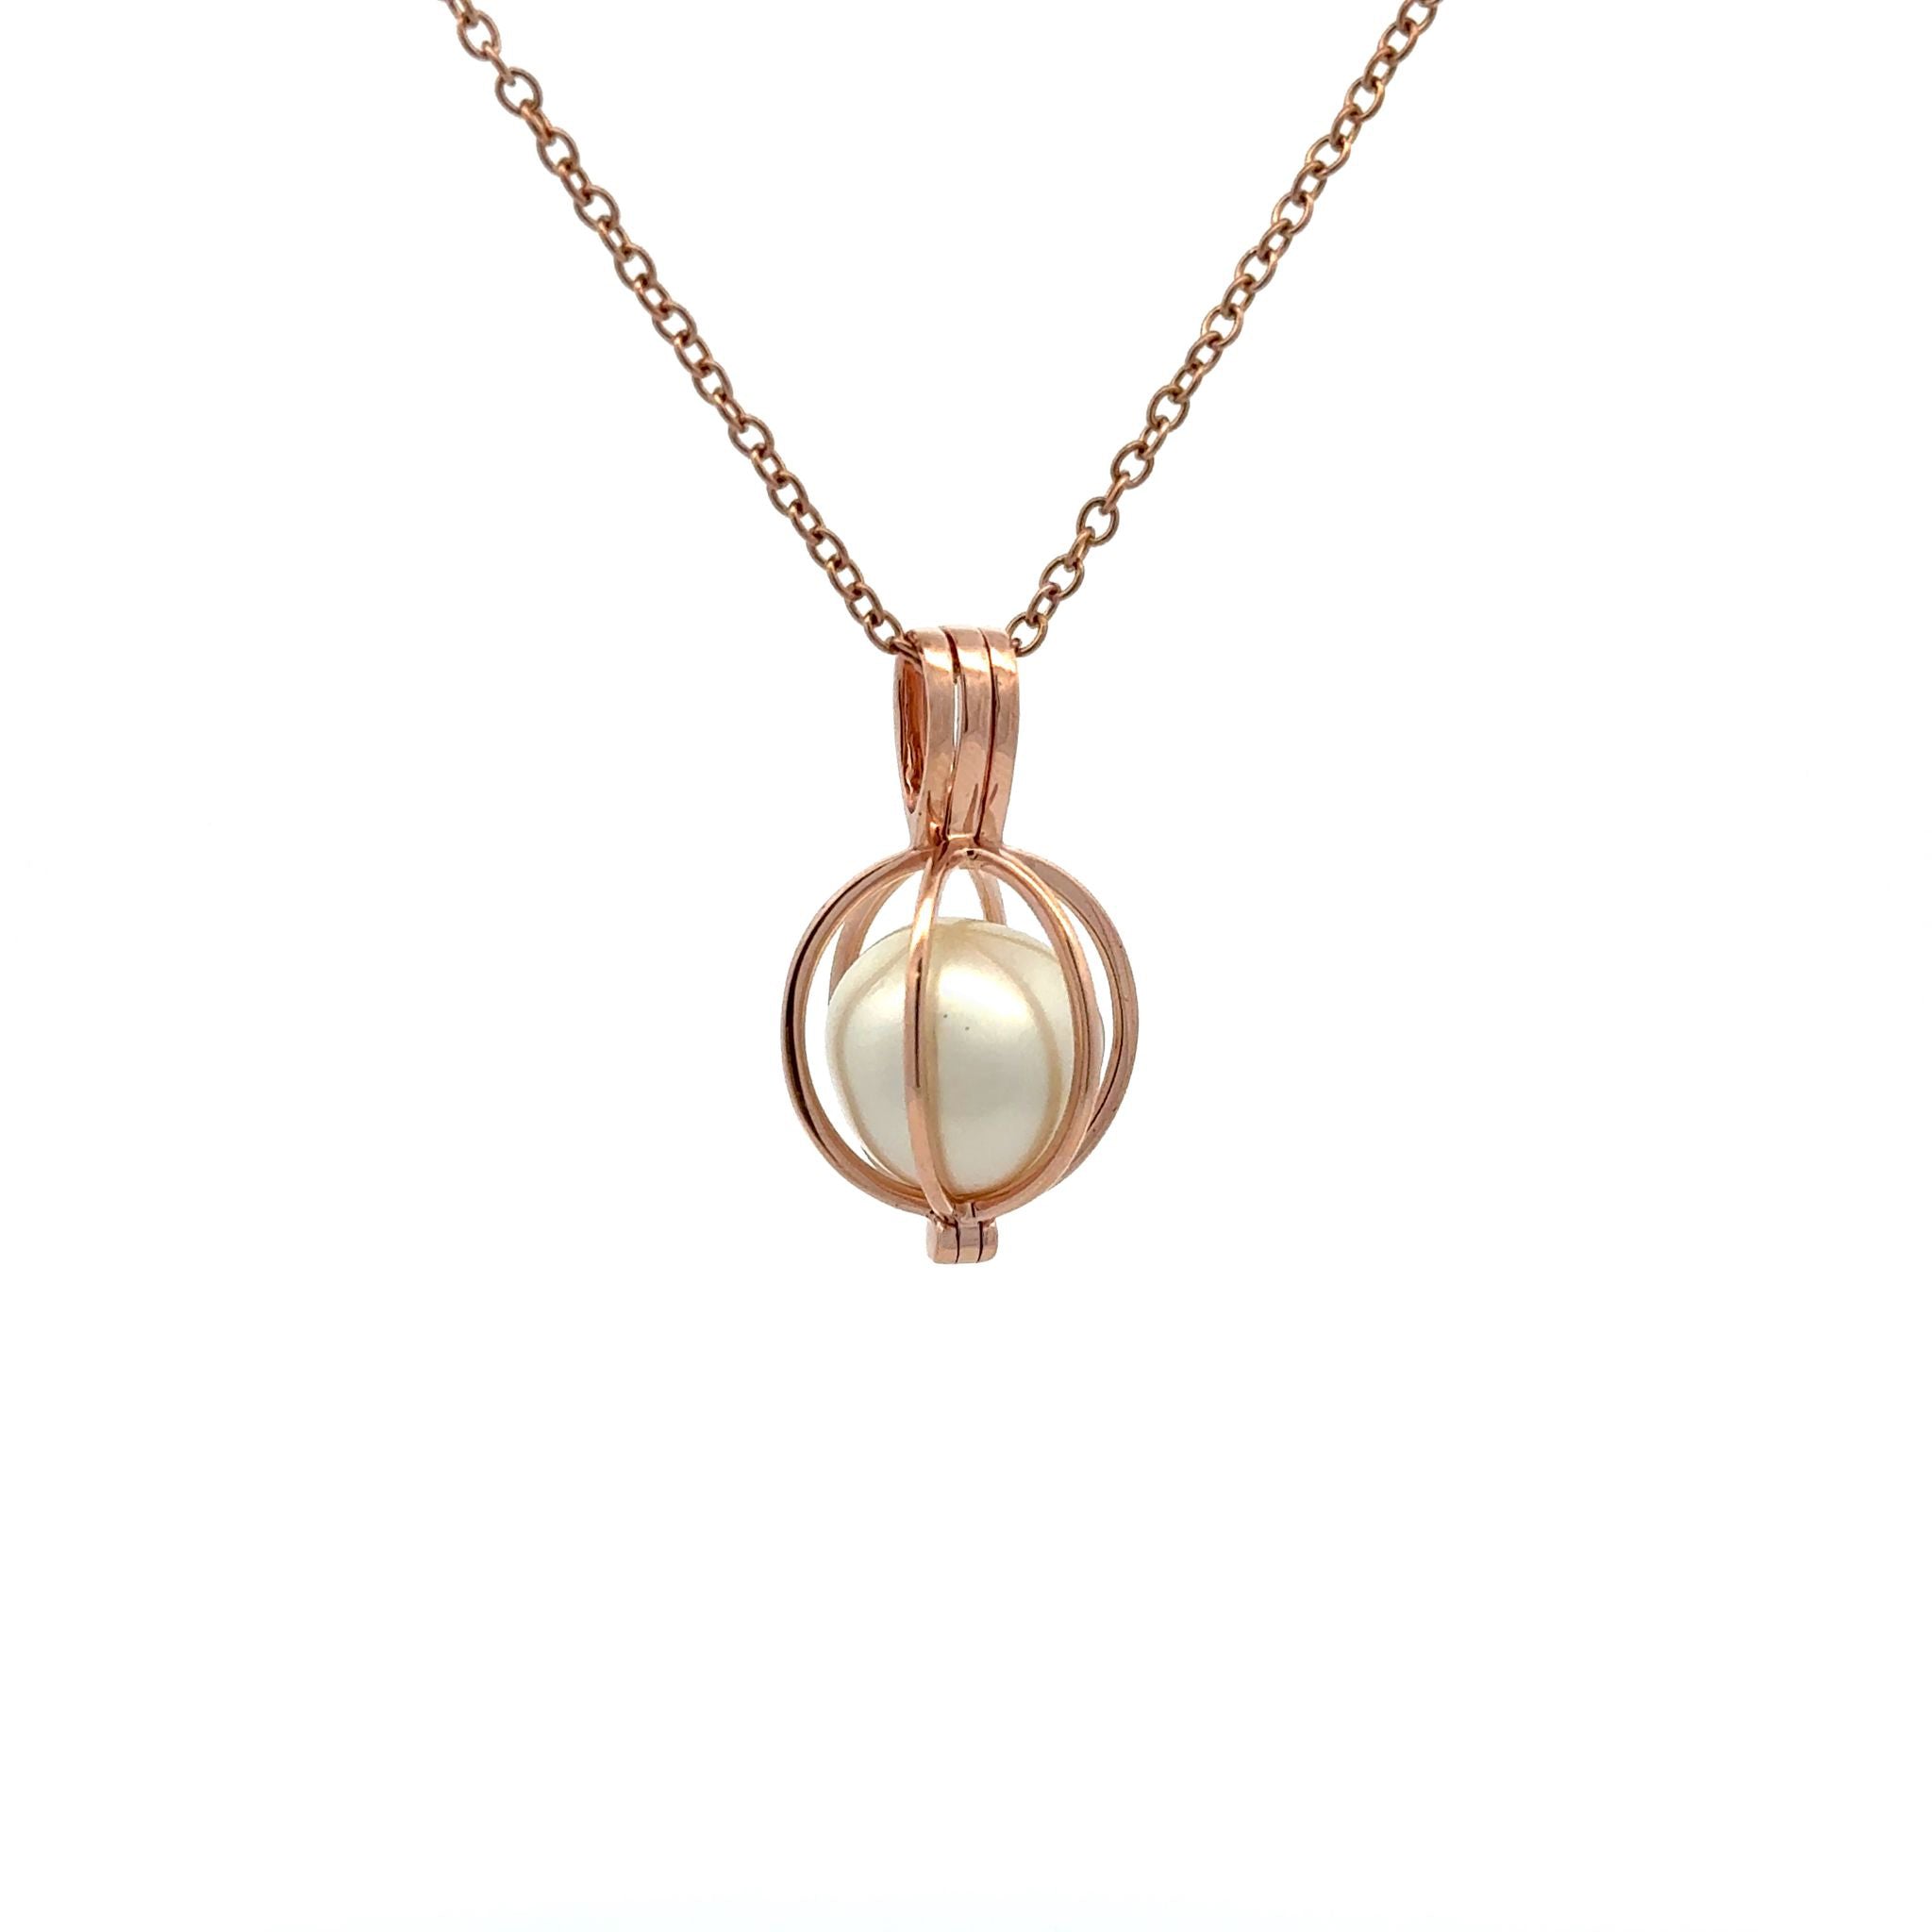 9K Rose Gold Australian South Sea Cultured 11-12mm Cage Pearl Pendant